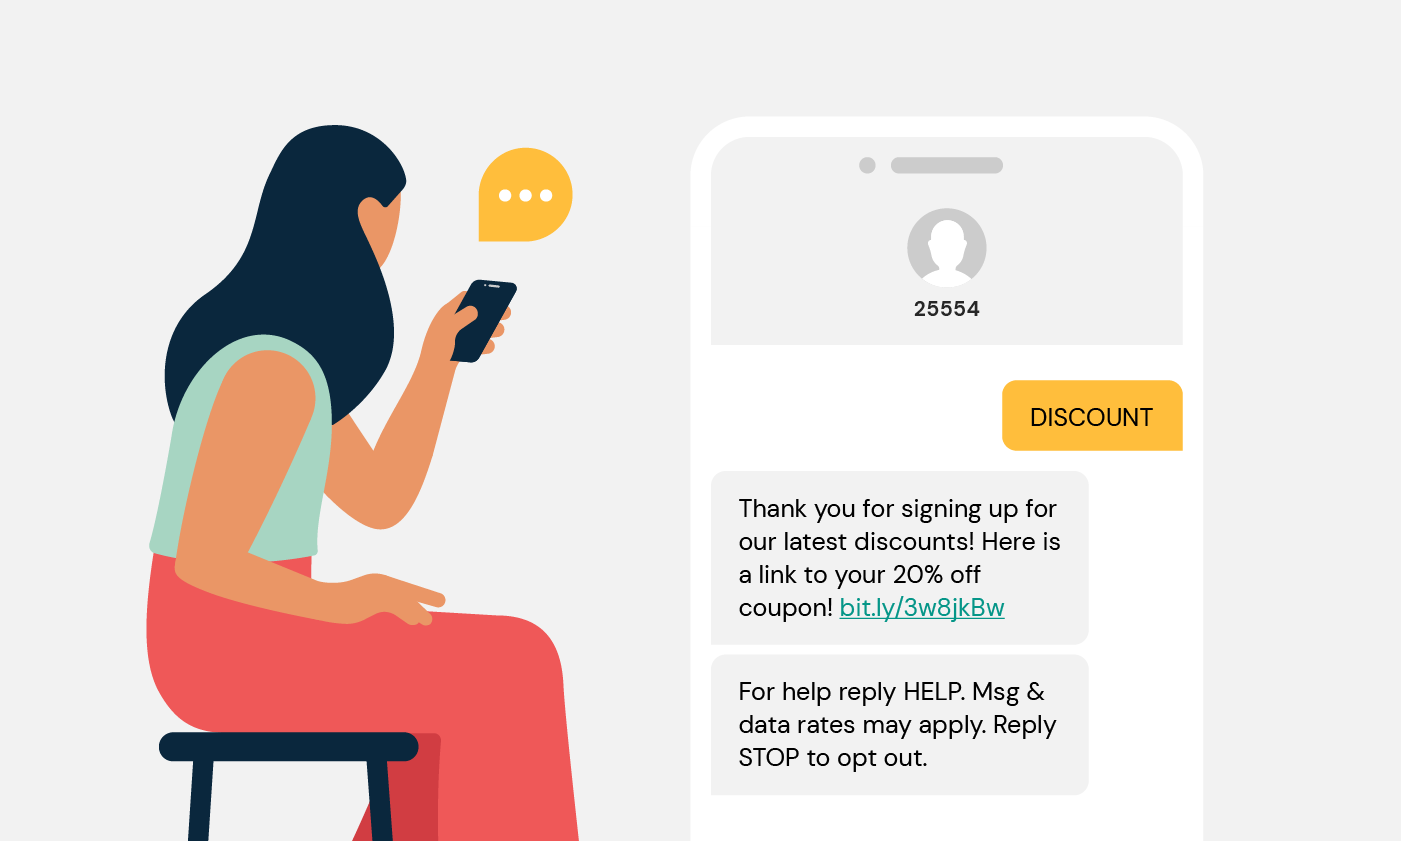 Illustration shows how a person can receive a short code message